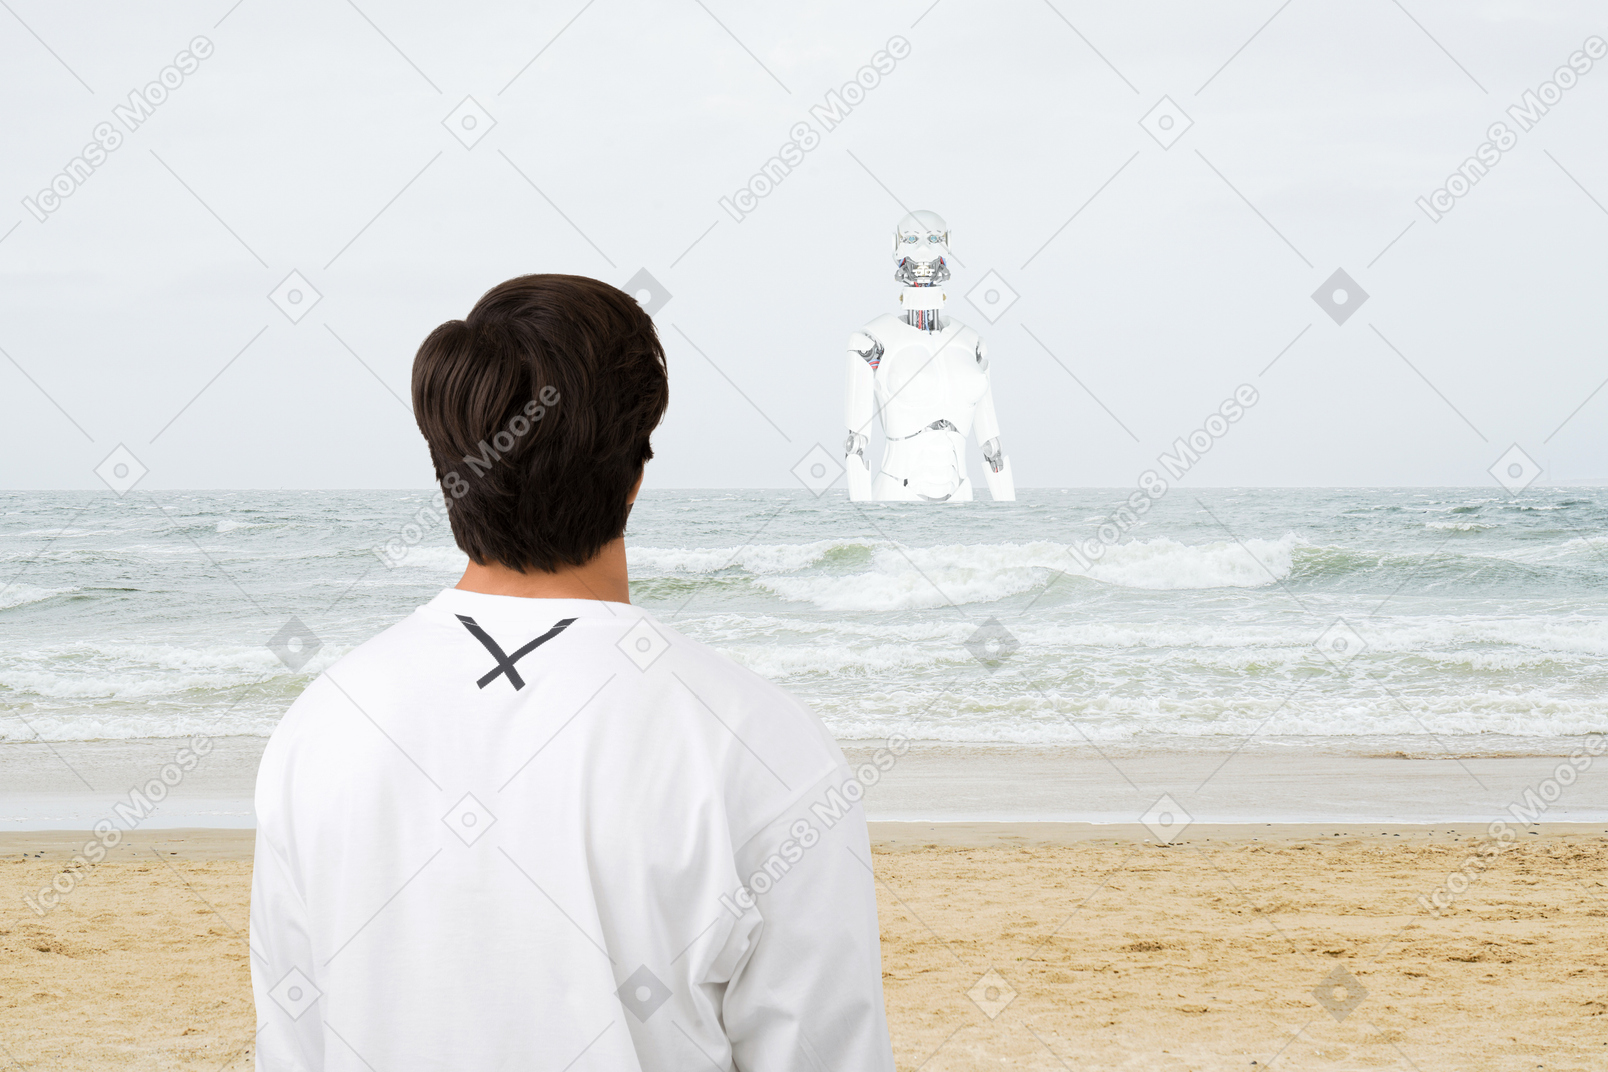 Latino man watching a woman robot standing in the sea and looking at him